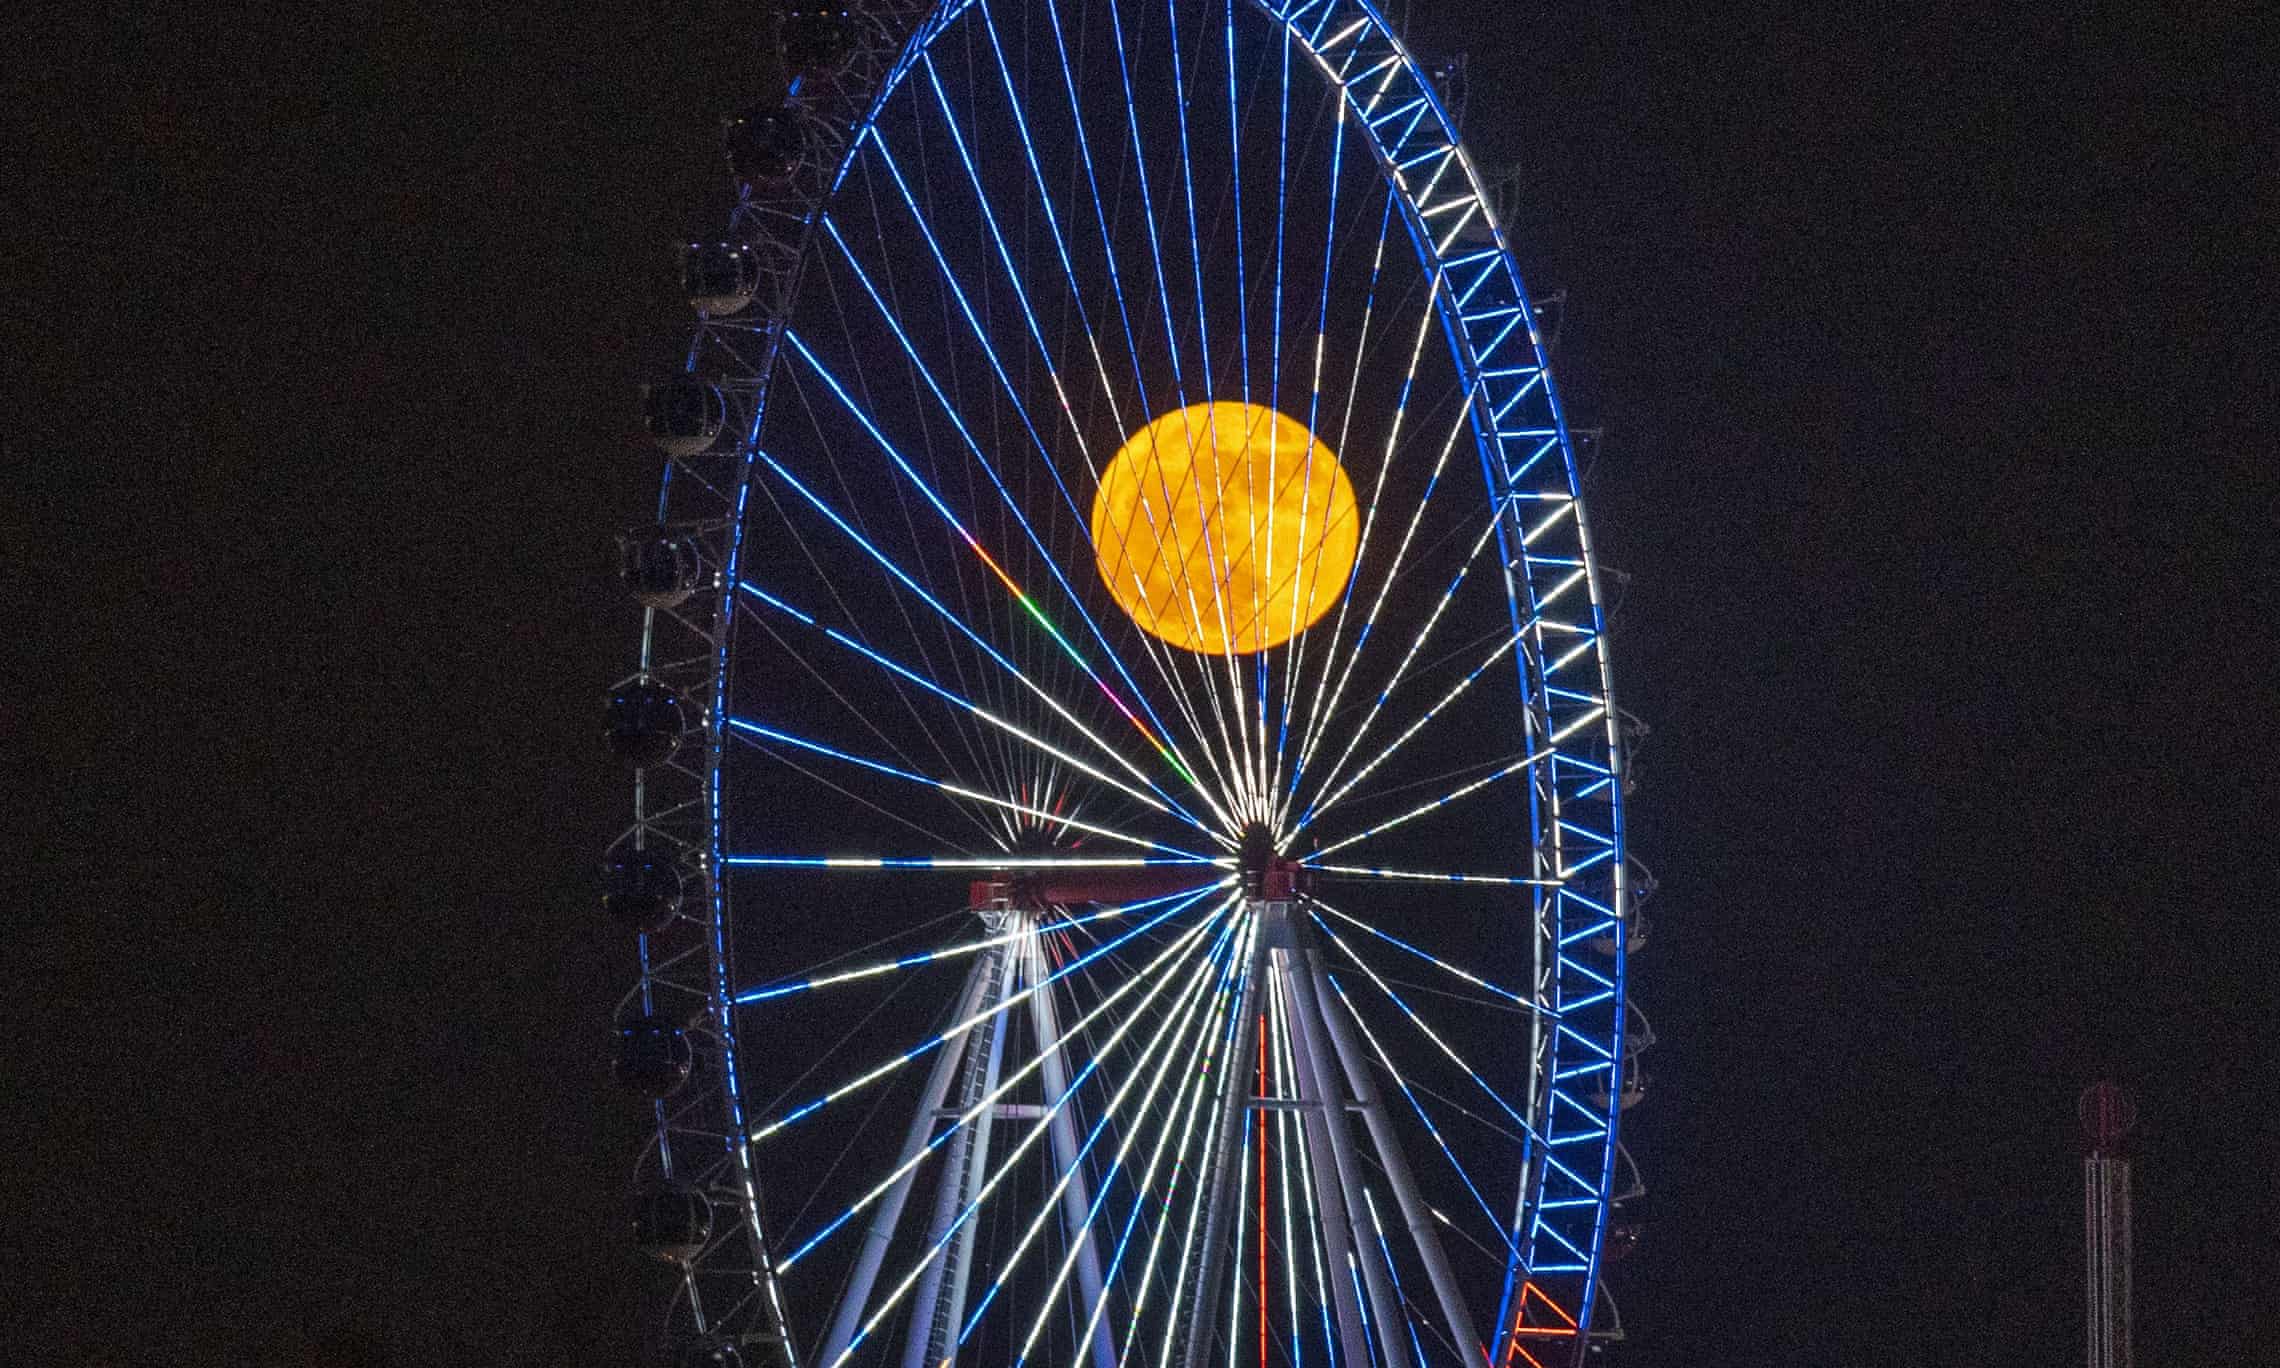 Antalya, Turkey. The moon, large and yellow, is seen through the struts of a Big Wheel